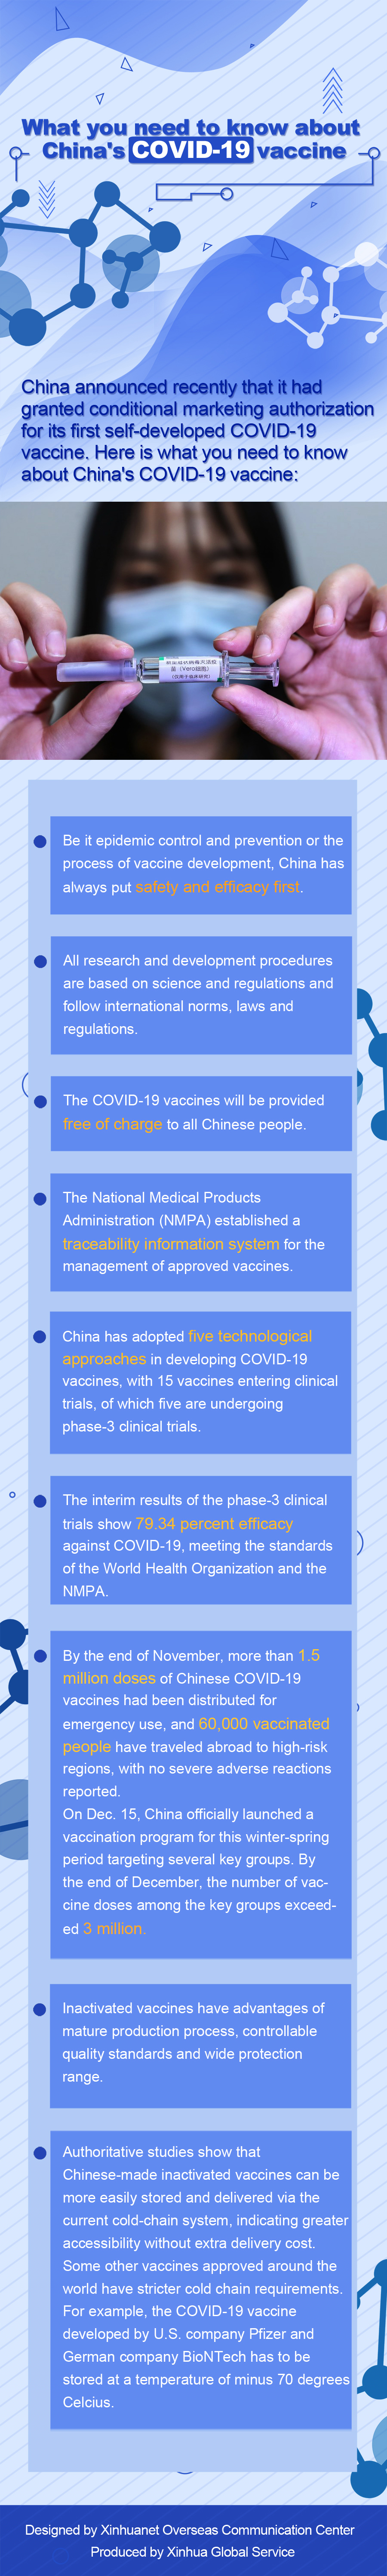 Infographic: What you need to know about China's COVID-19 vaccine